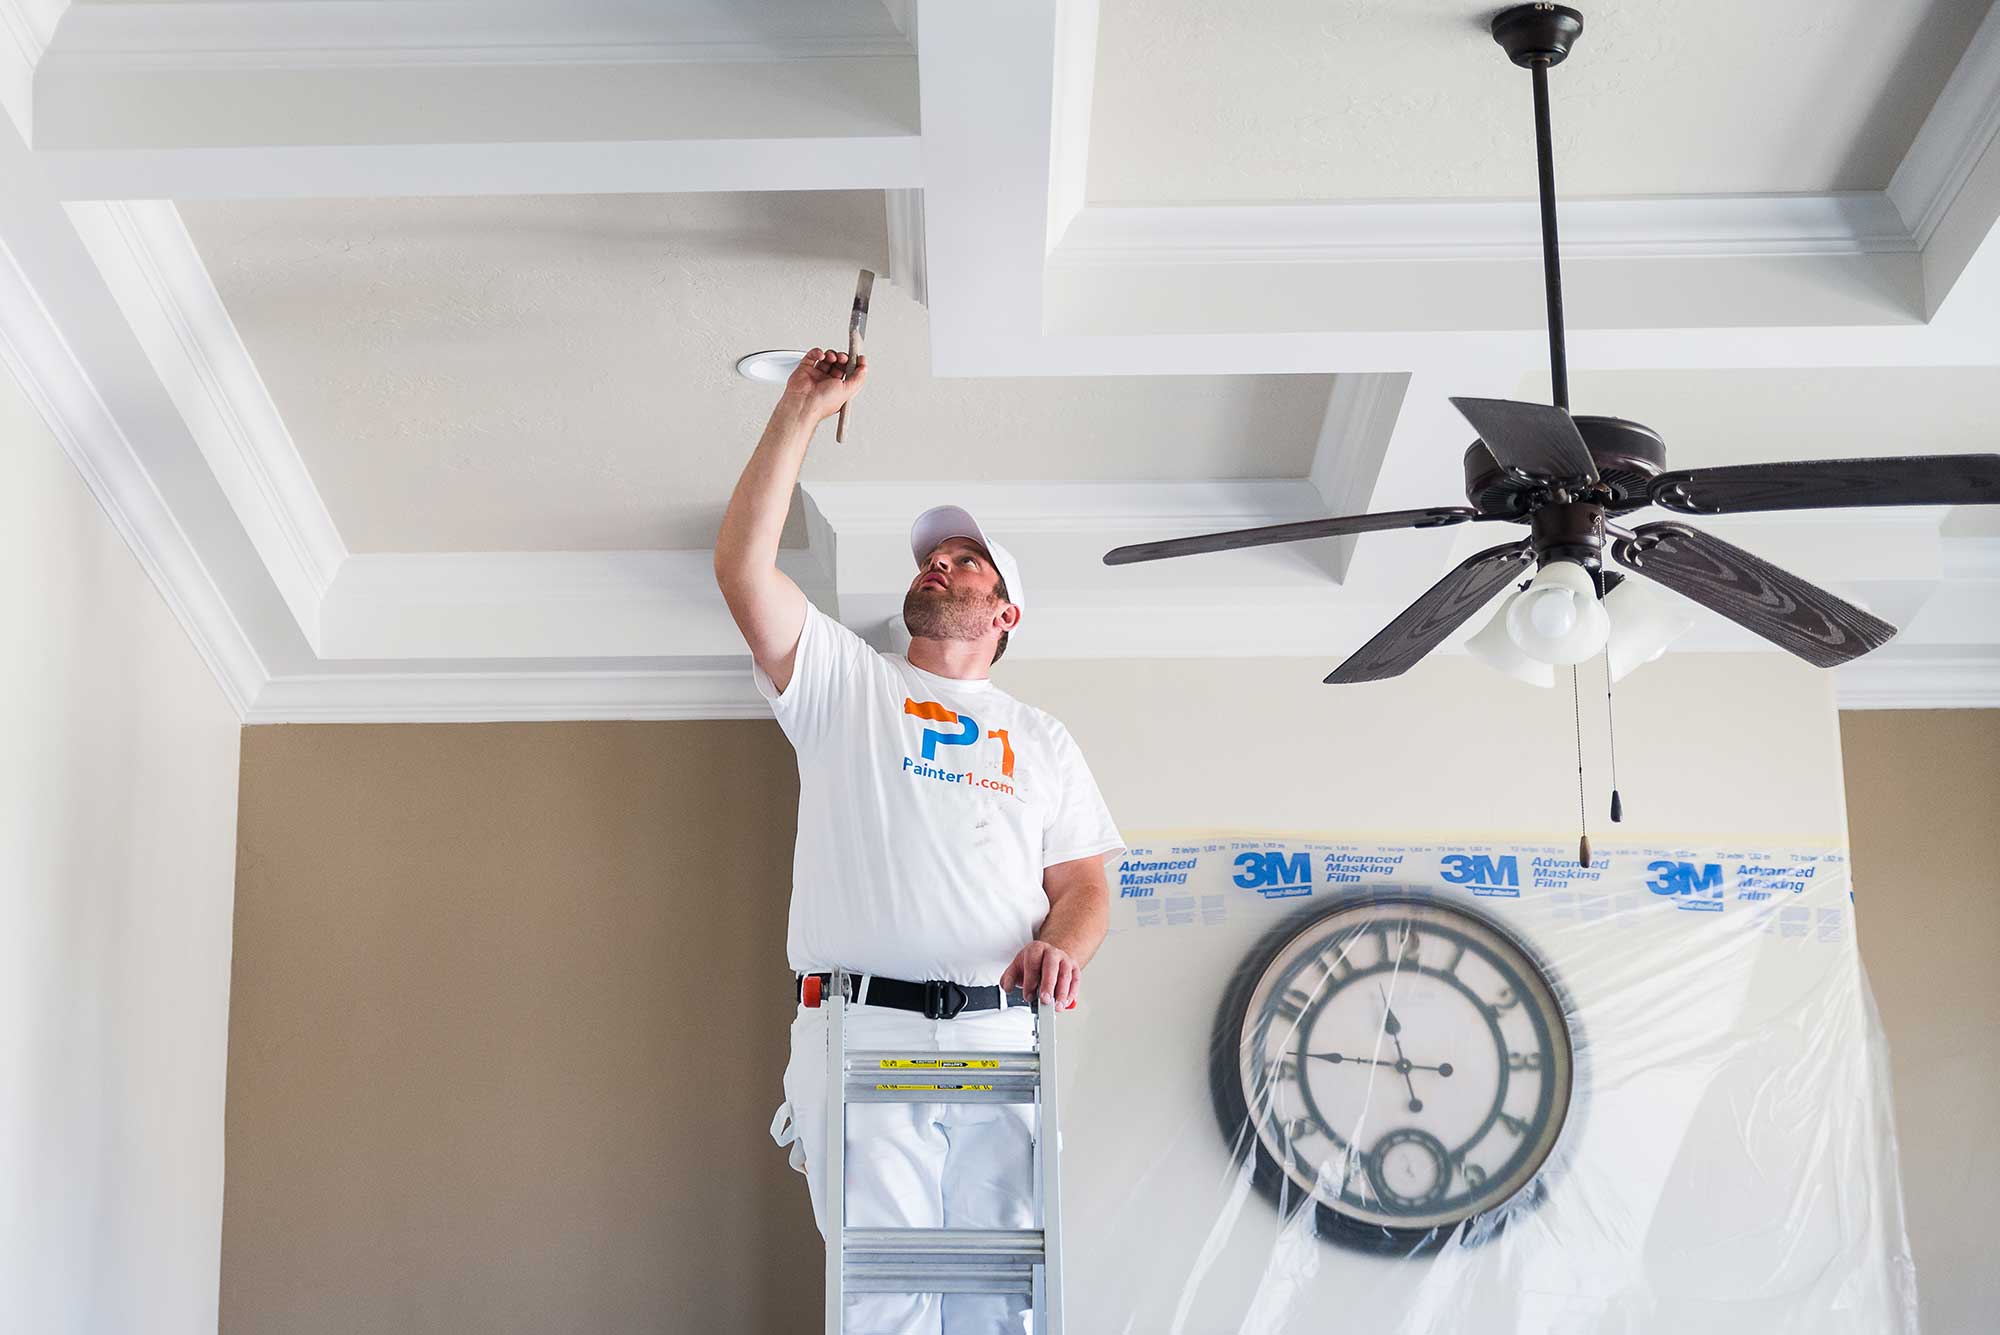 Painter1 of DFW offers professional popcorn ceiling removal in McKinney, Frisco & Allen.